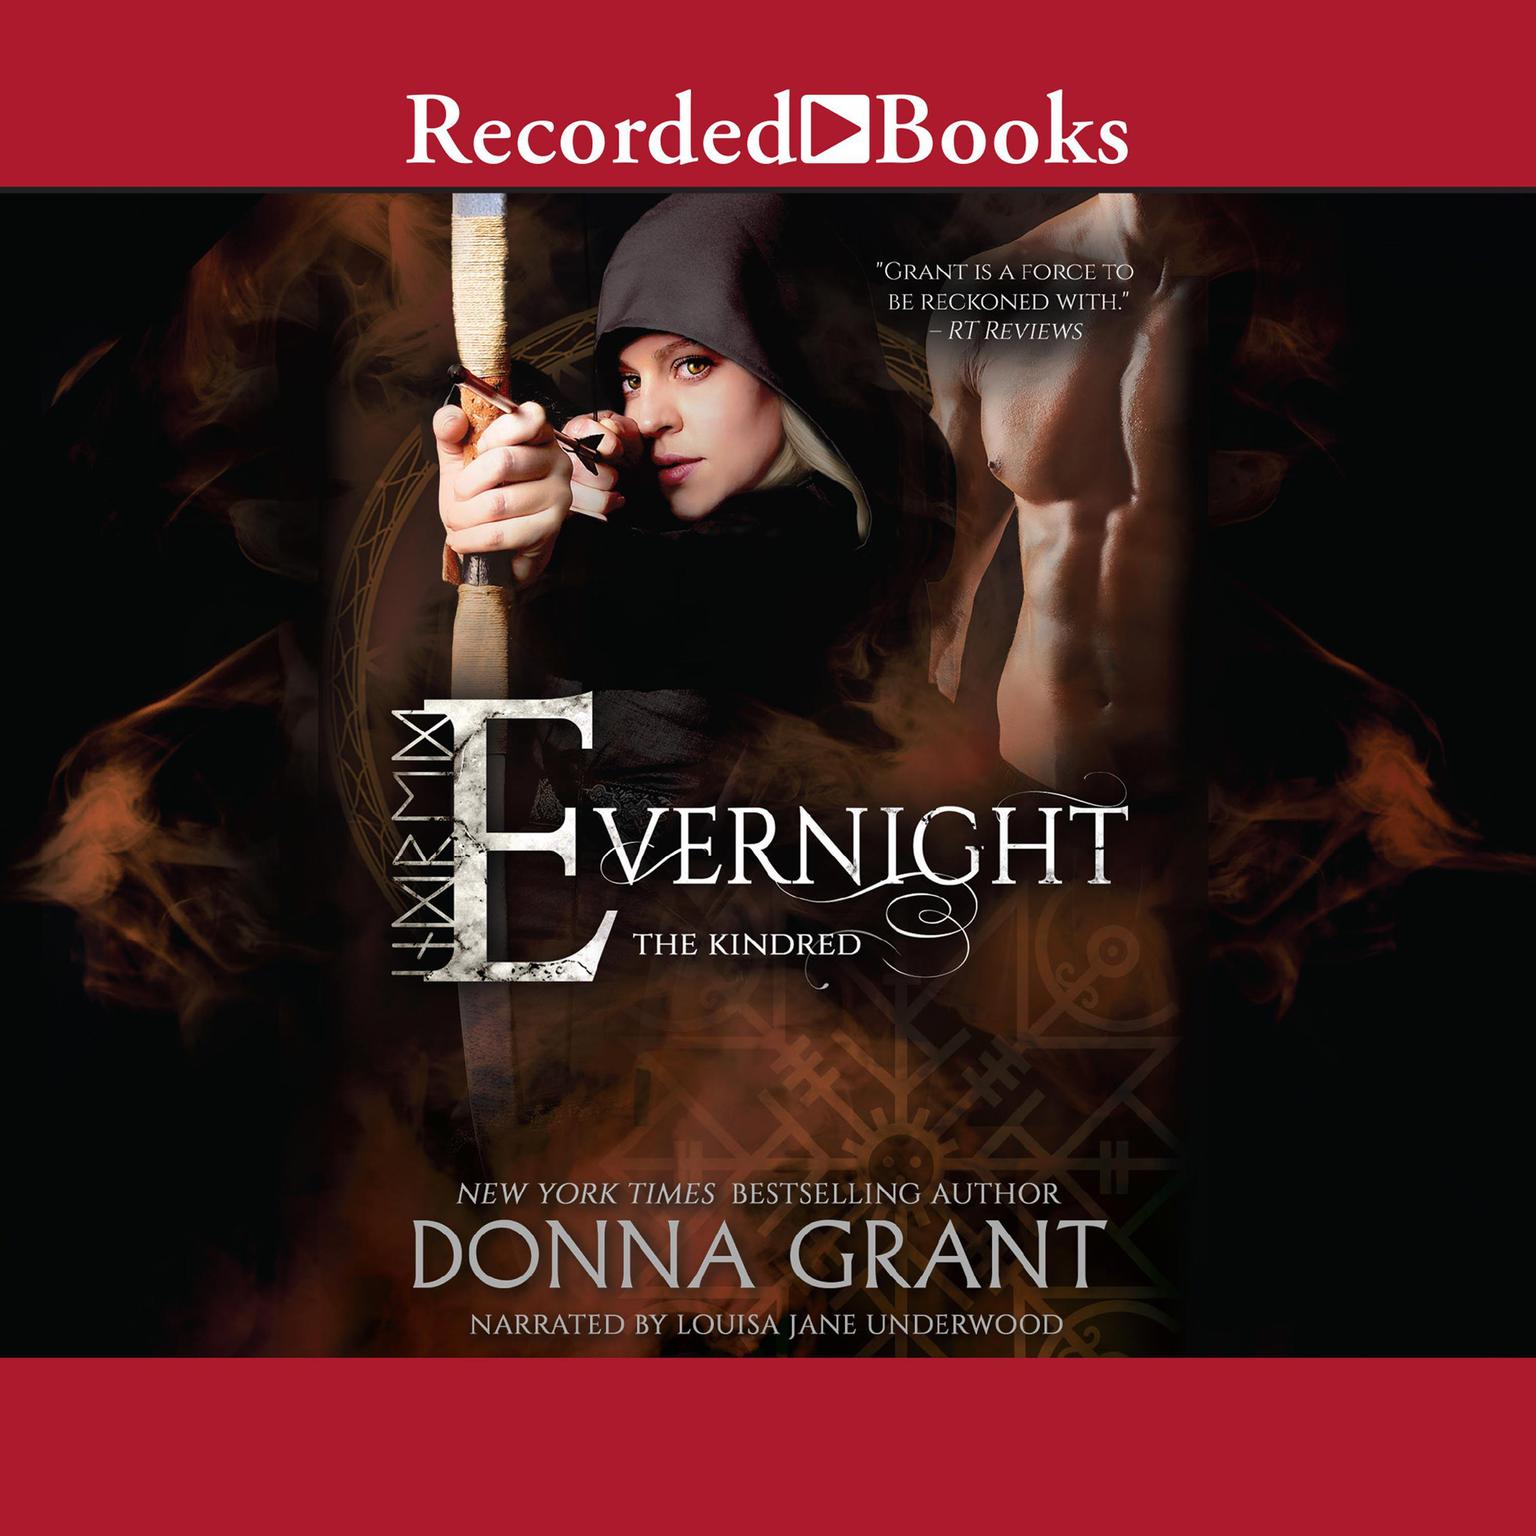 Evernight Audiobook, by Donna Grant